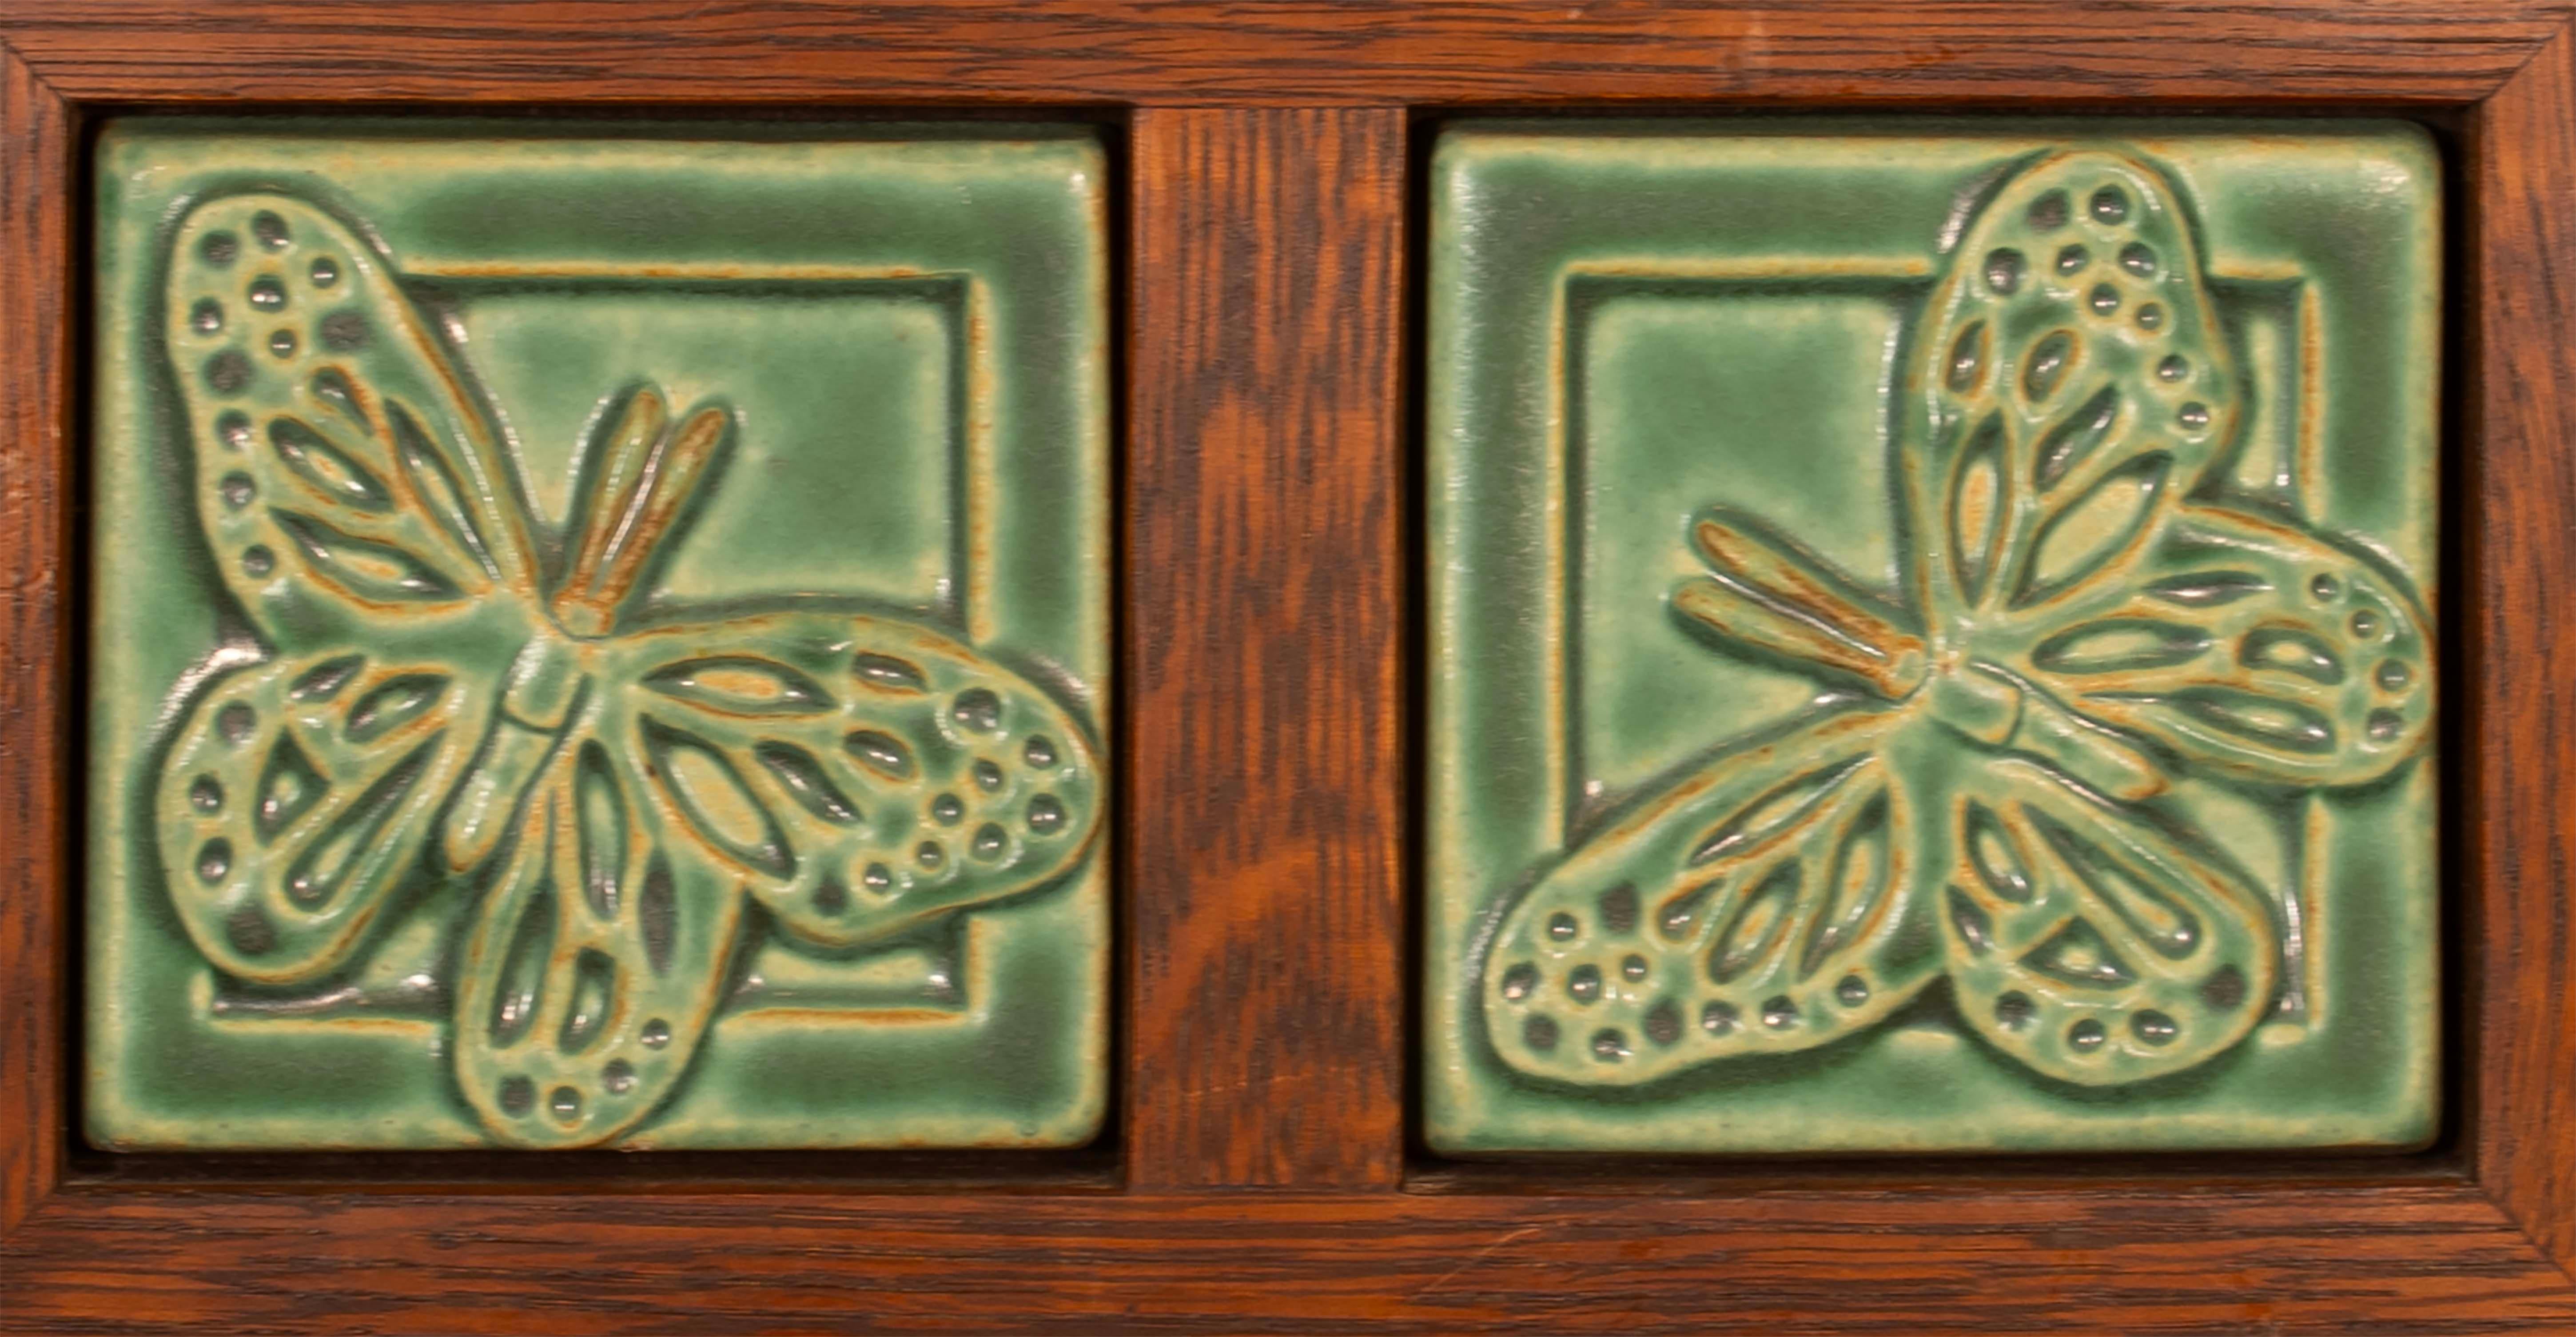 Add a touch of charm to your home with this beautifully crafted framed Pewabic Detroit butterfly tiles. The square tiles feature a stunning green color that will liven up any space. A simple, yet elegant piece that would fit perfectly in any home.